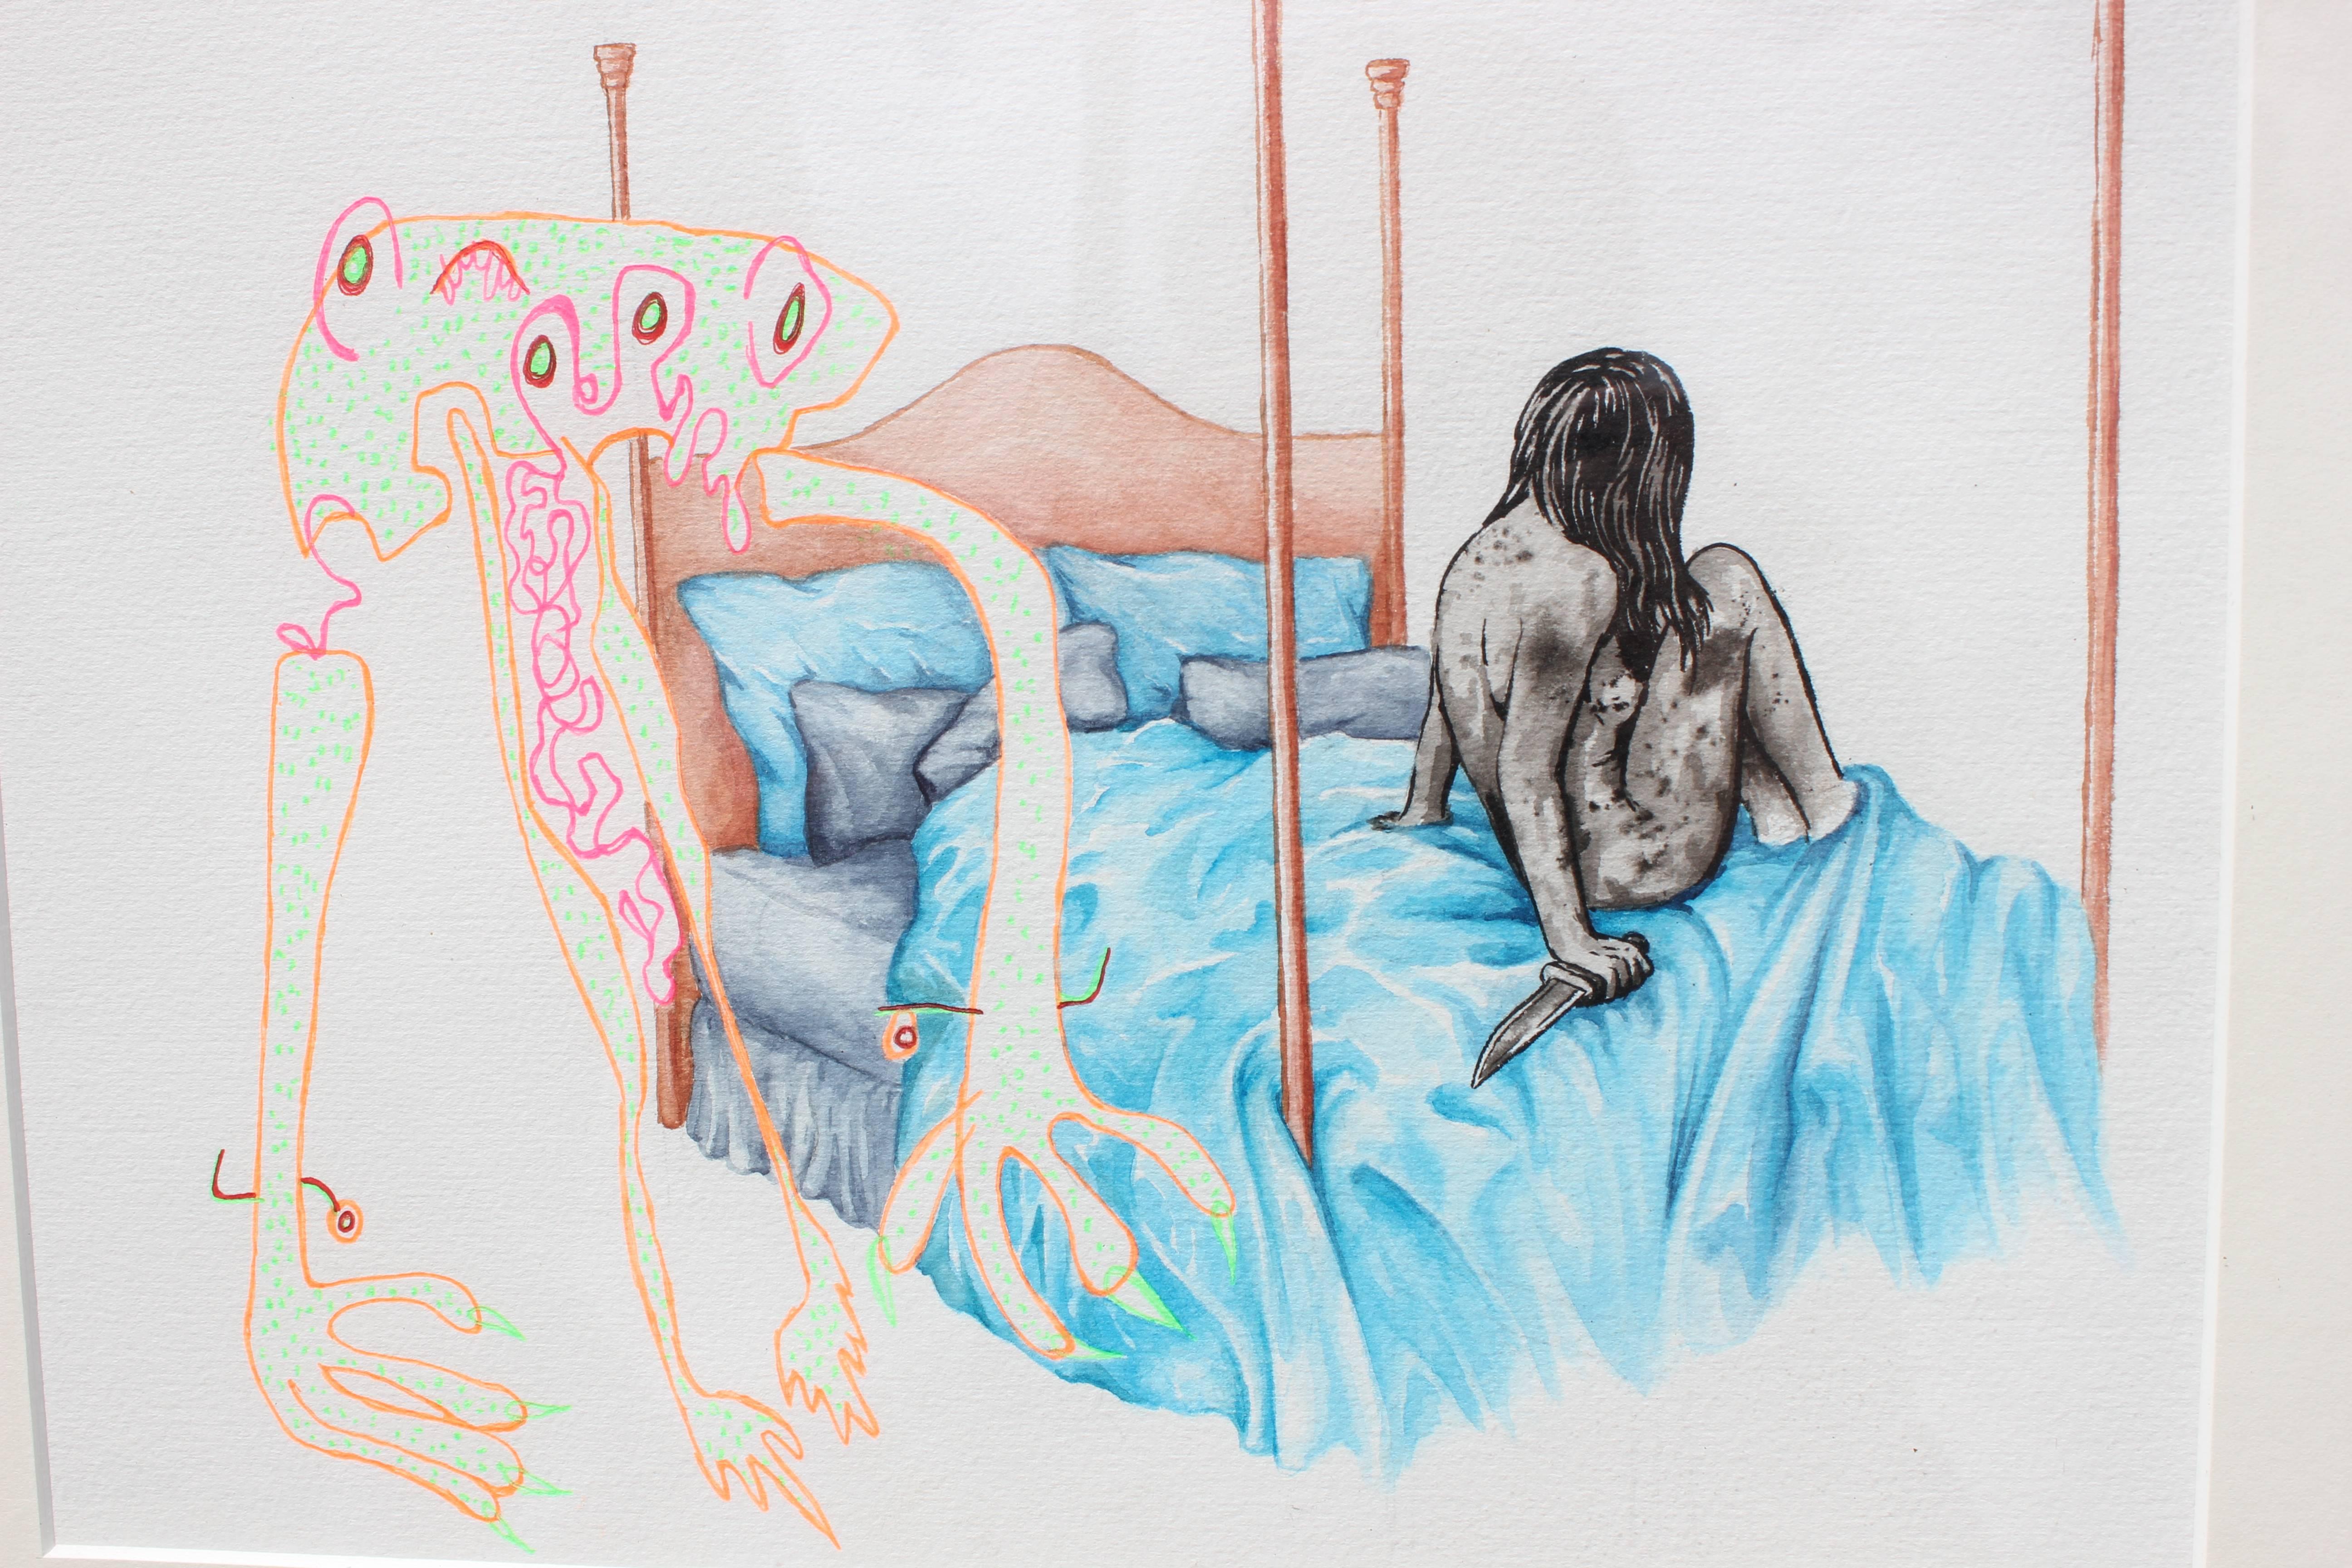 Light colored surrealist painting of a girl sitting on a bed holding a knife. The female and the bed is painted in watercolor and the monster figure standing over her is done in an ink pen. The work is framed in a black frame with a white matte. It